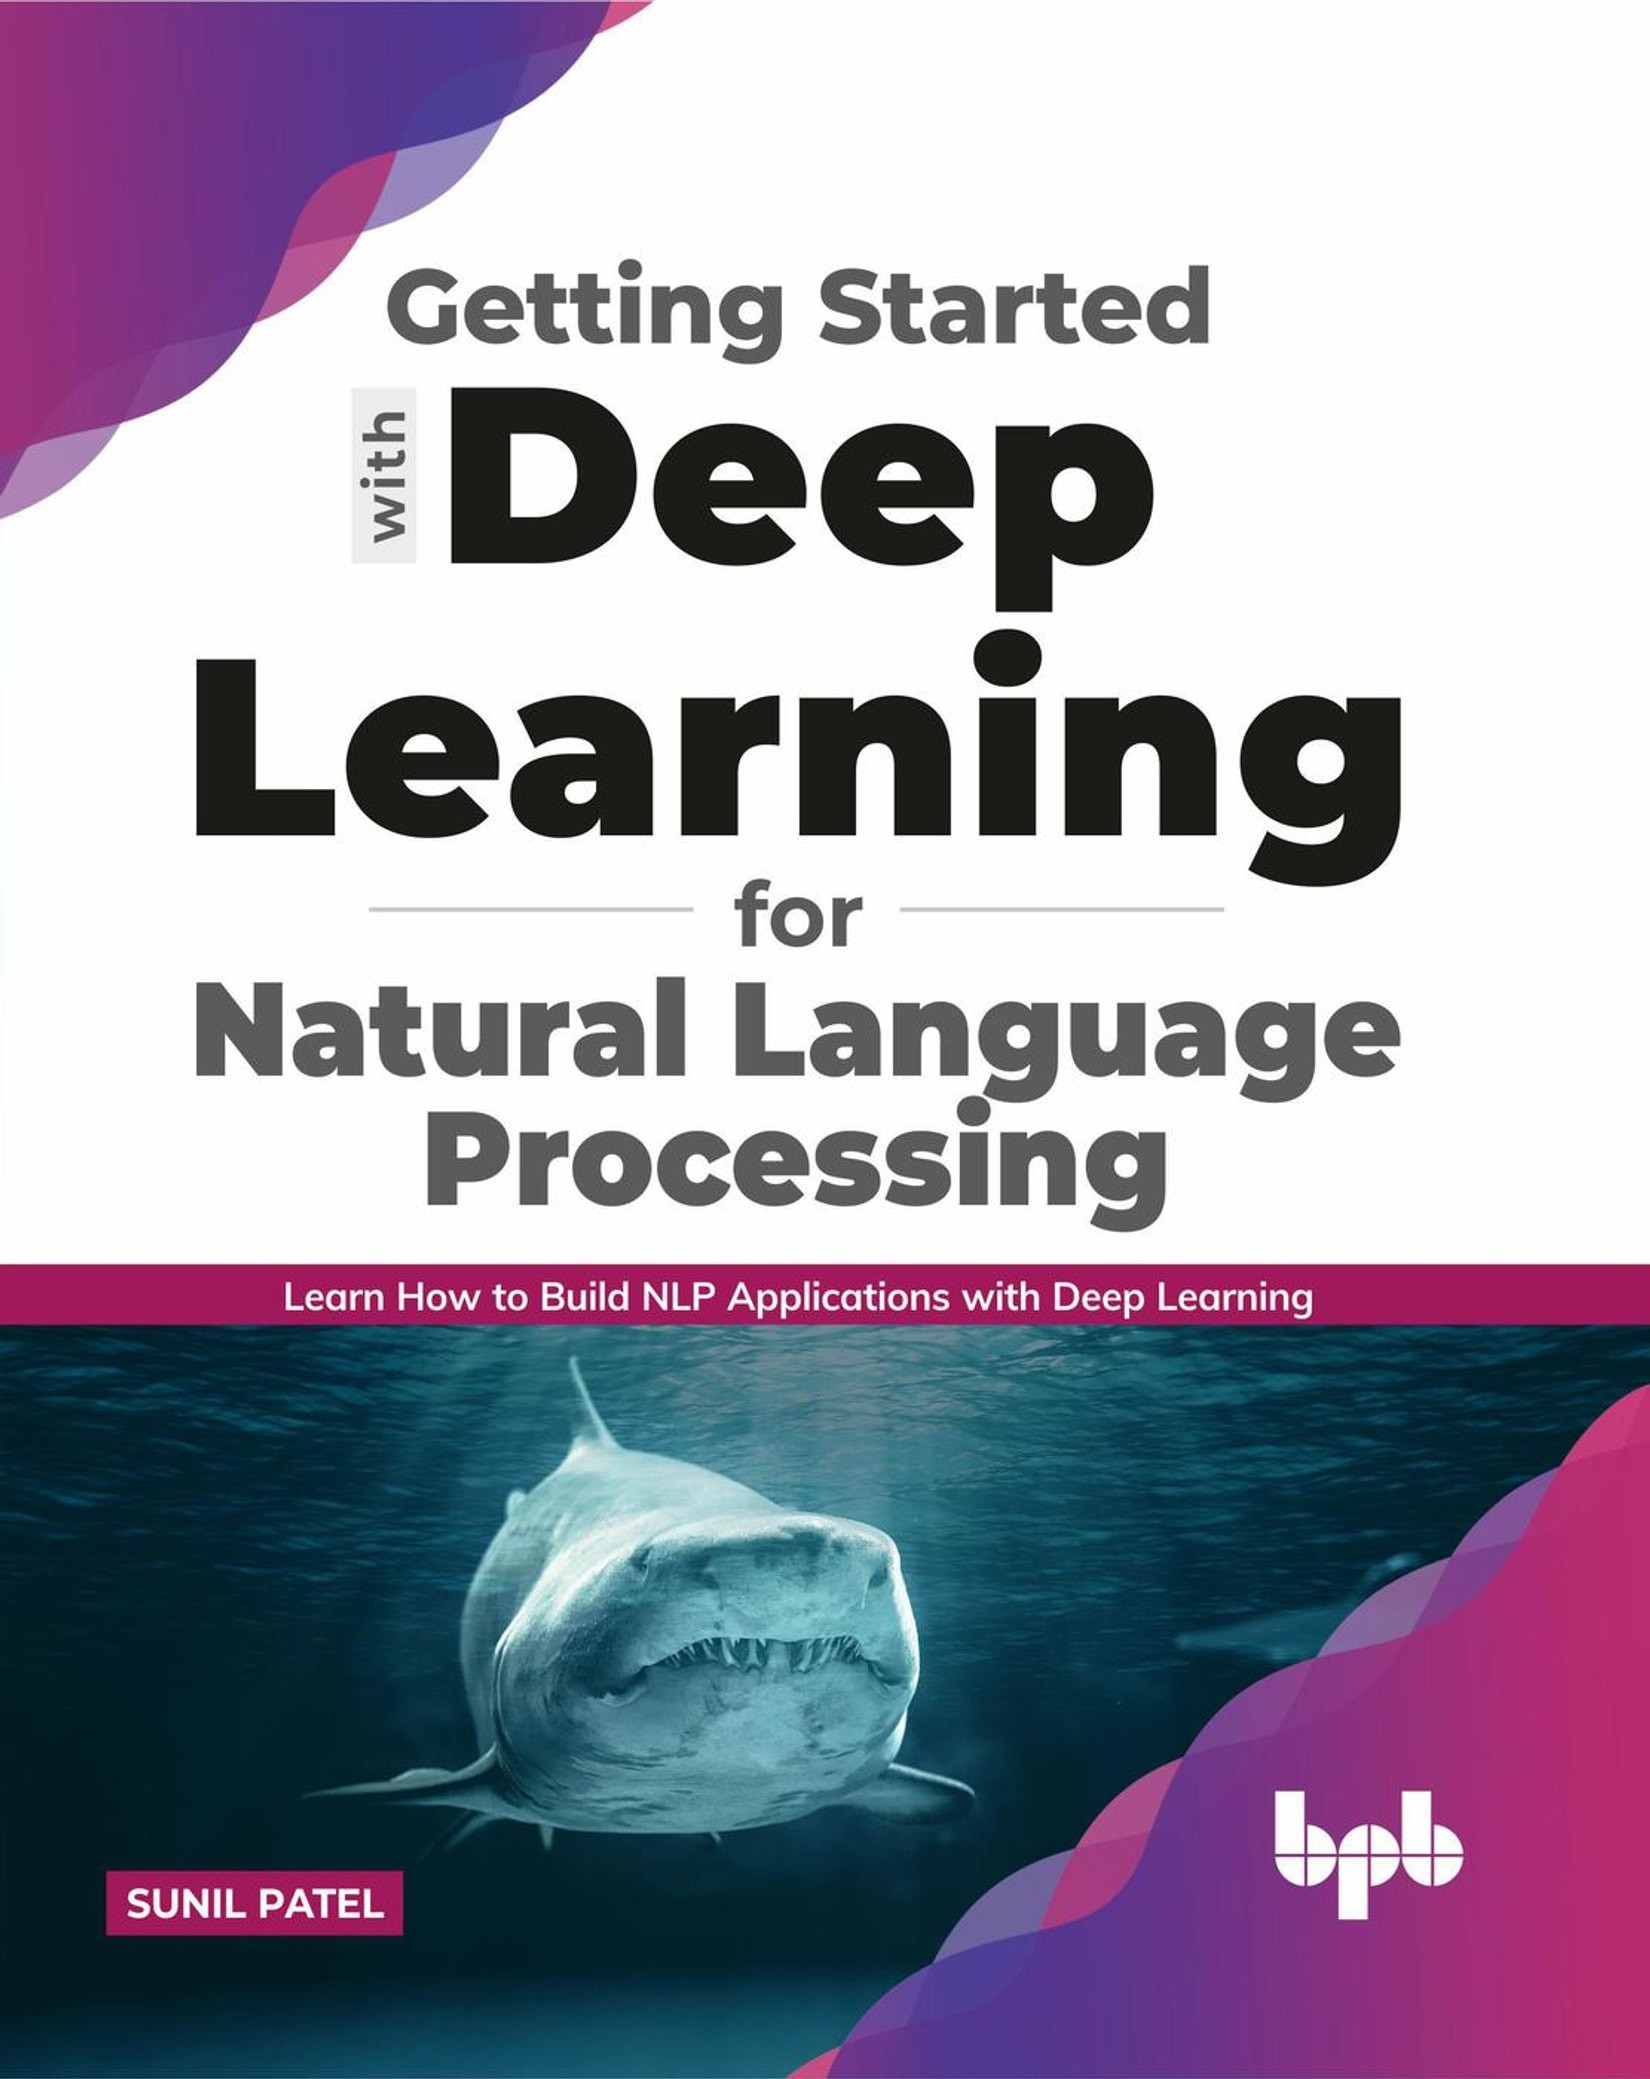 Getting Started With Deep Learning for Natural Language Processing: Learn How to Build NLP Applications With Deep Learning